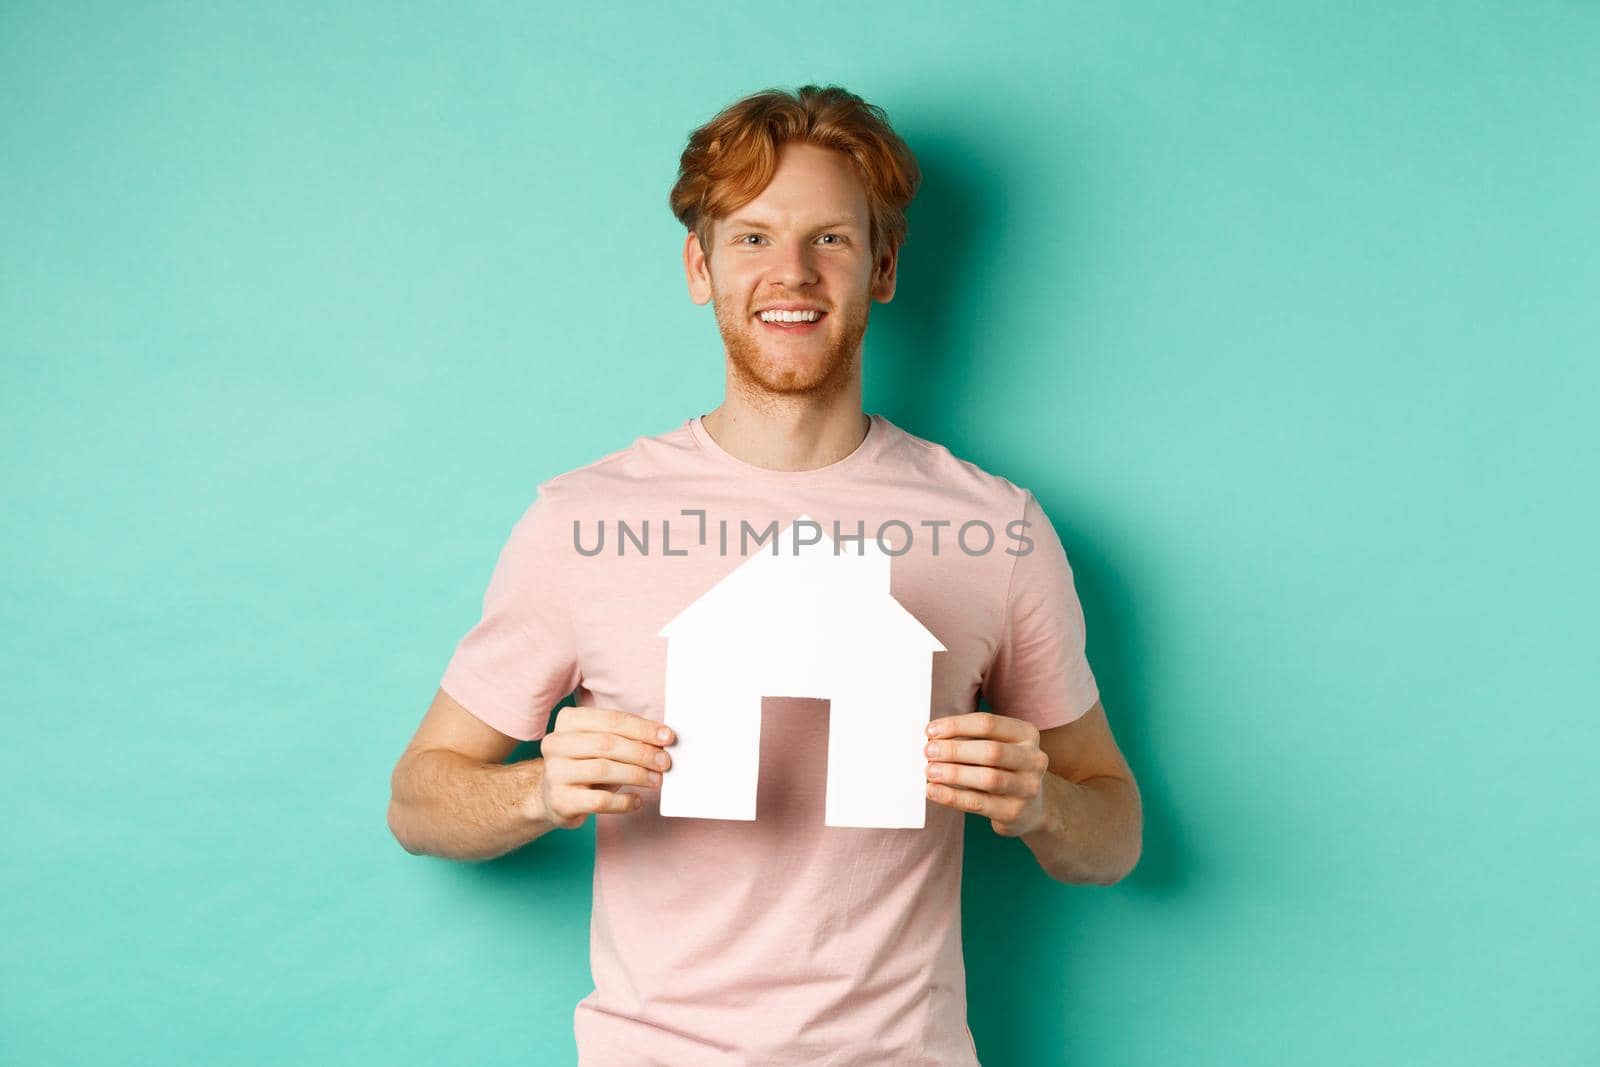 Real estate concept. Young man with red hair, wearing t-shirt, showing paper house cutout and smiling happy, standing over mint background. Copy space